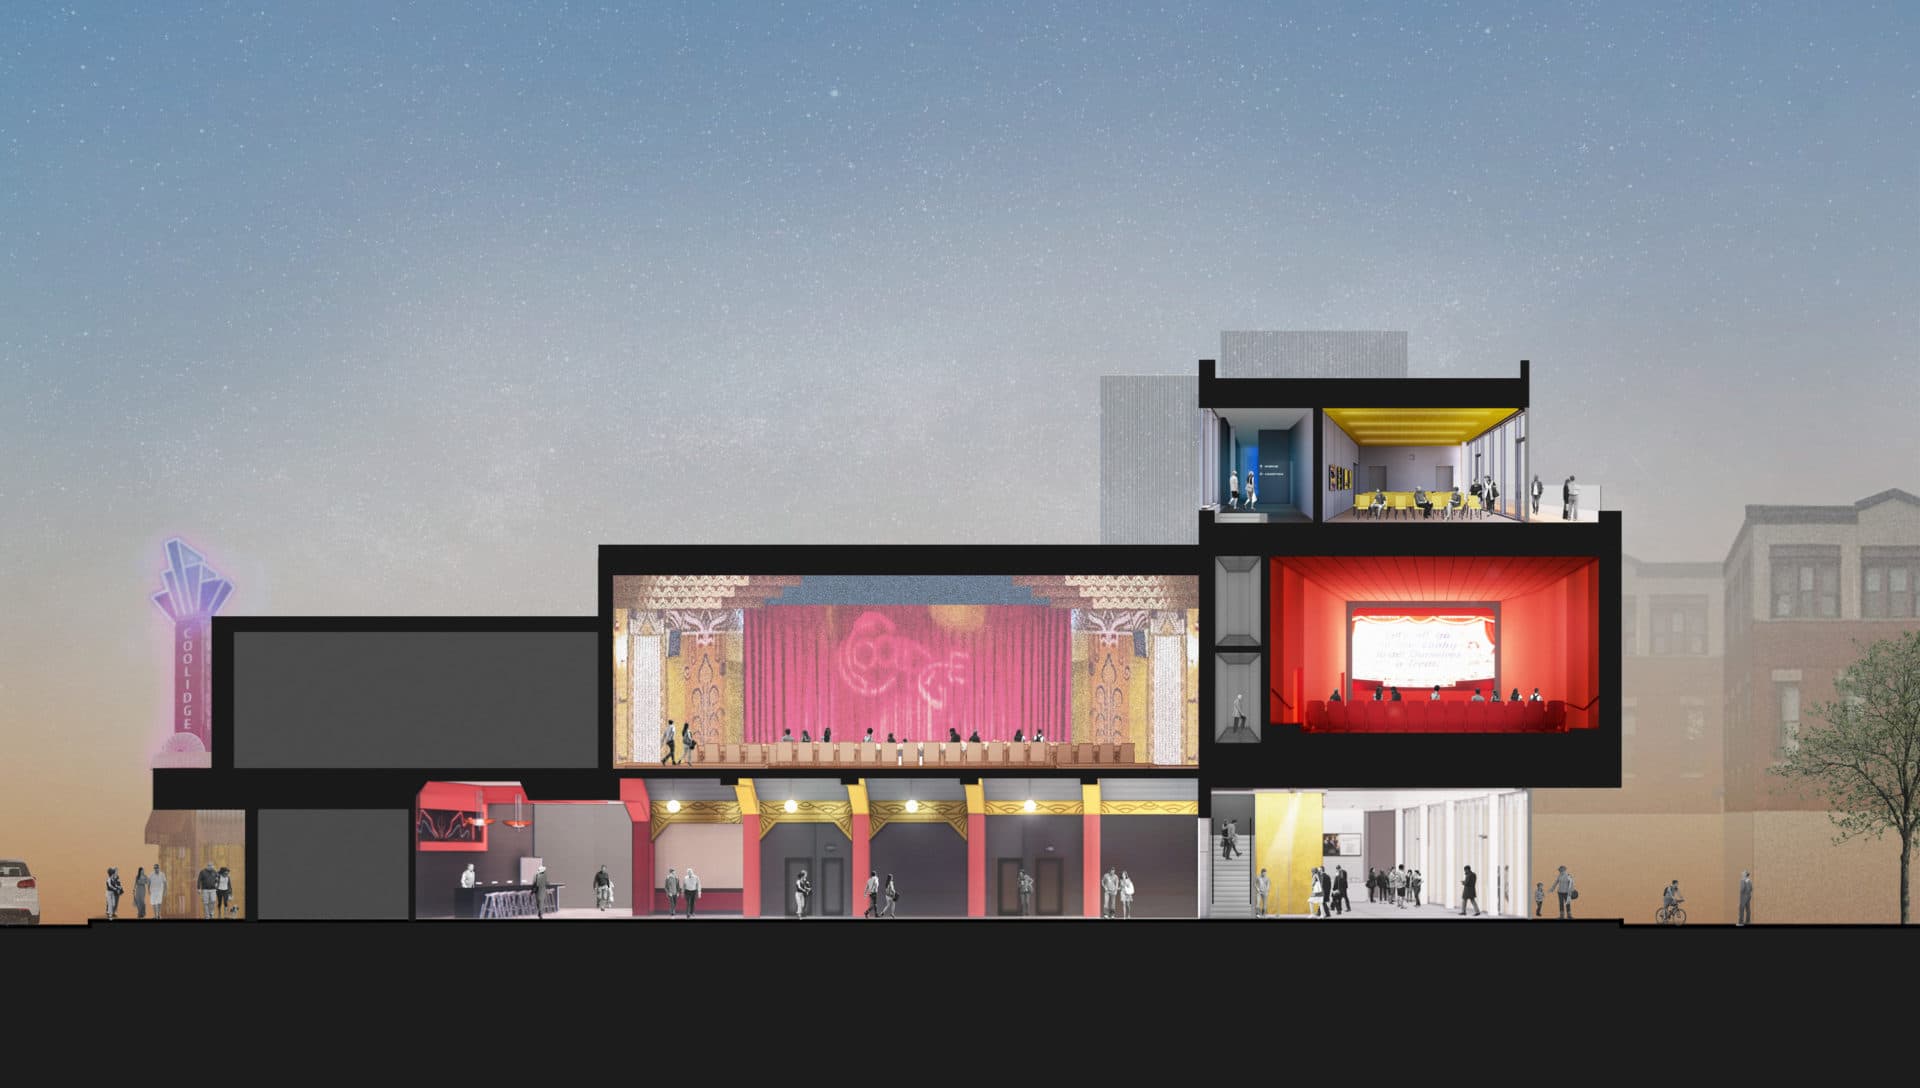 A rendering illustrating a section perspective of the Coolidge Corner Theatre expansion. (Courtesy Höweler + Yoon Architecture, LLP)